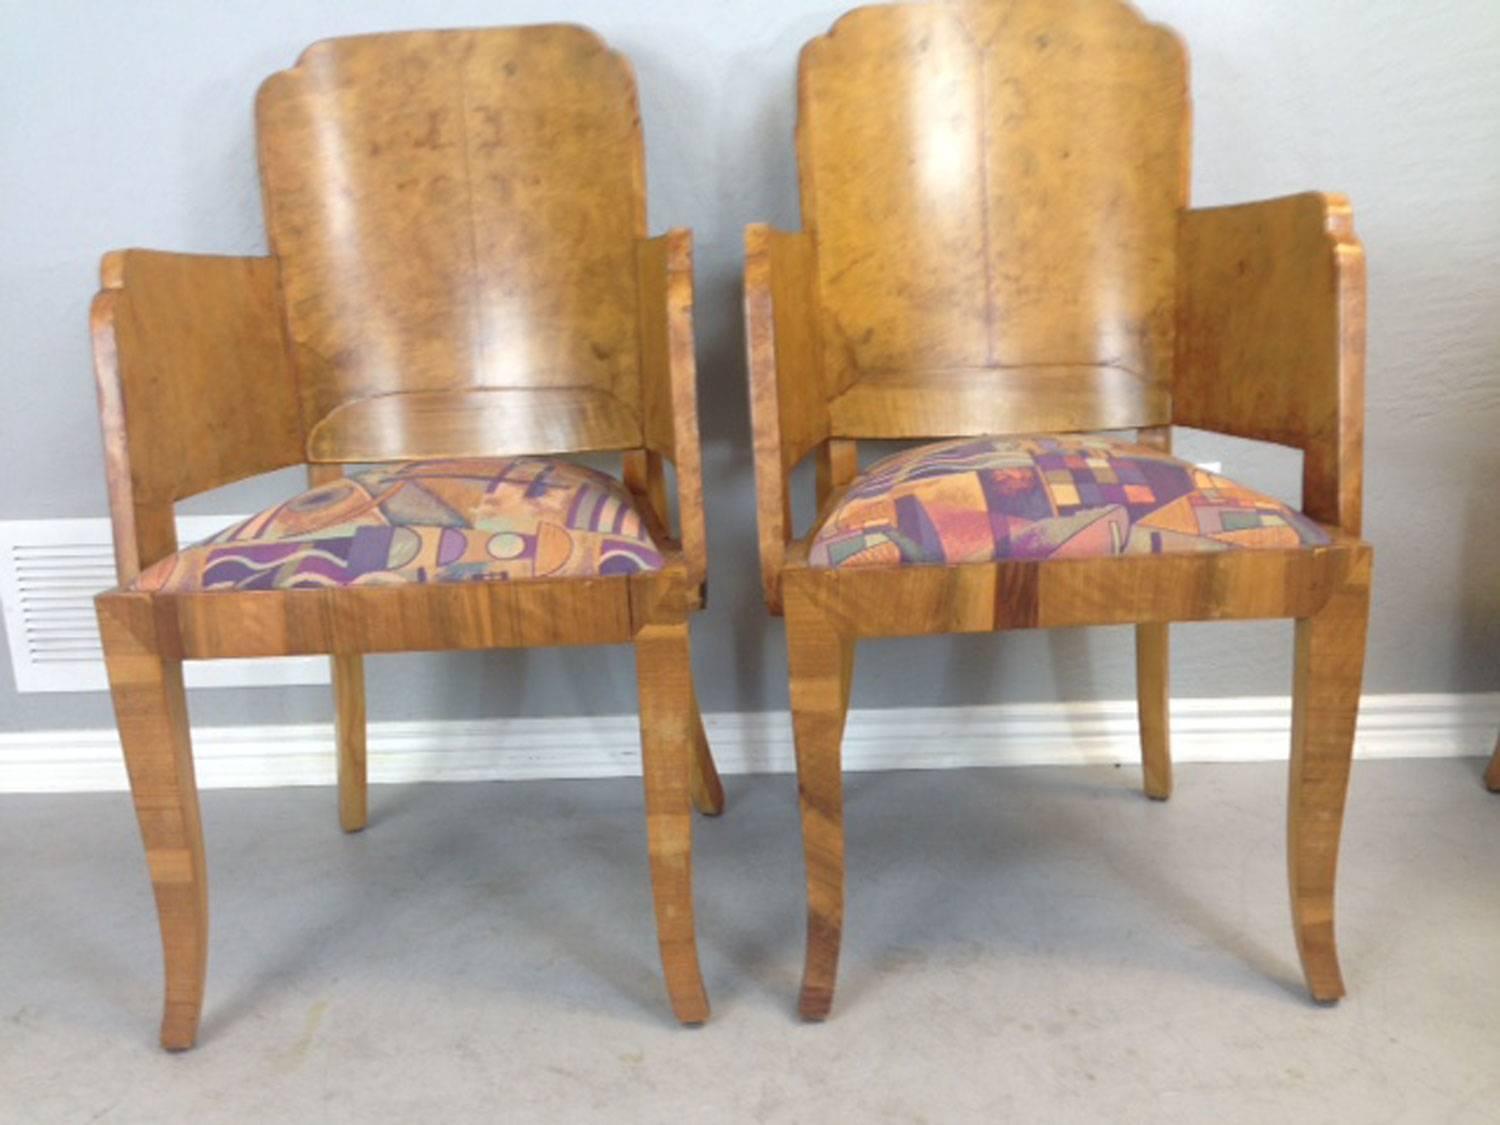 Rare Marcel Guillemard French Art Deco dining room table and eight chairs. Book-match amboyna wood from the padauk tree now famous for its use on Rolls Royce and Mercedes automobile dashboards. The burl wood nature of the grain of this wood lends